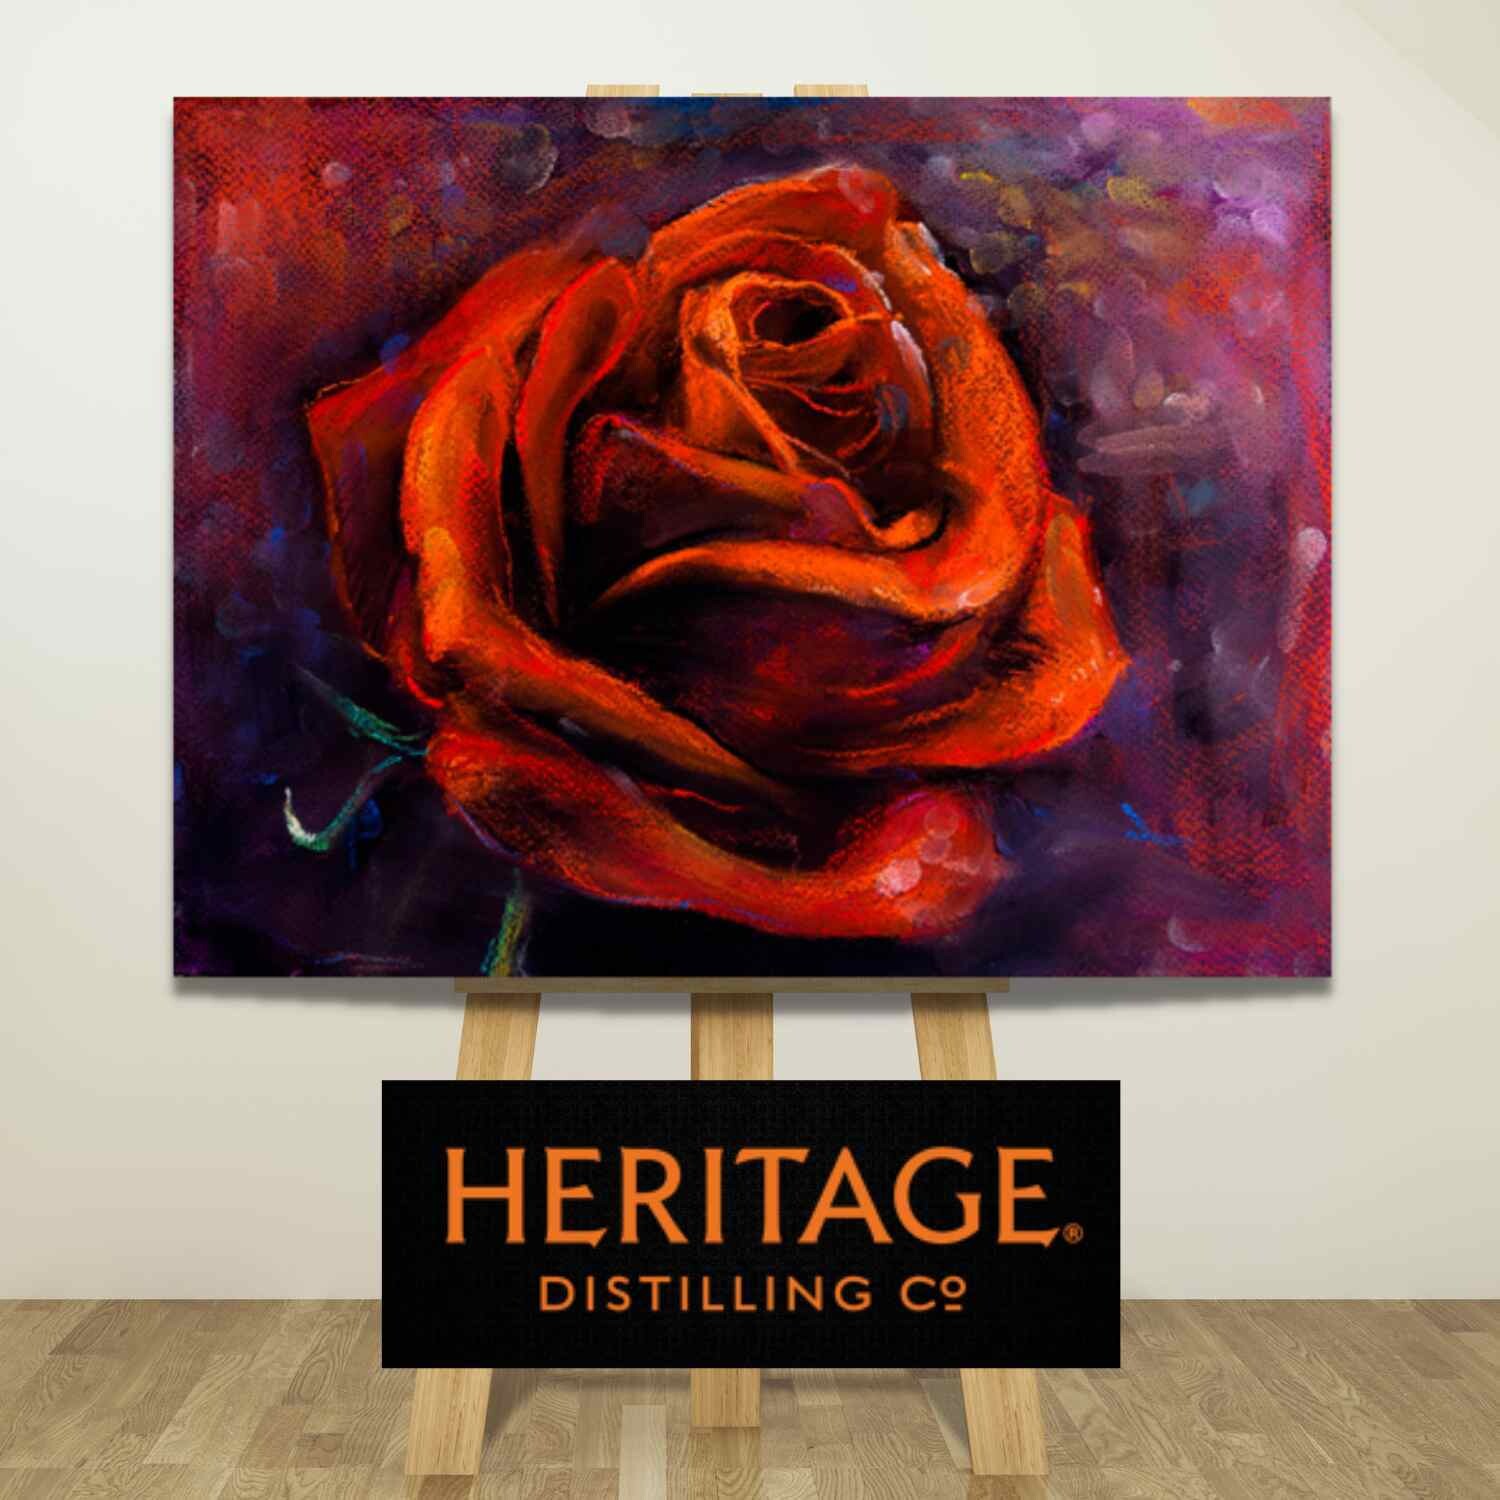 Paint and Taste at Heritage- Thurs Feb 9 @ 7-9pm